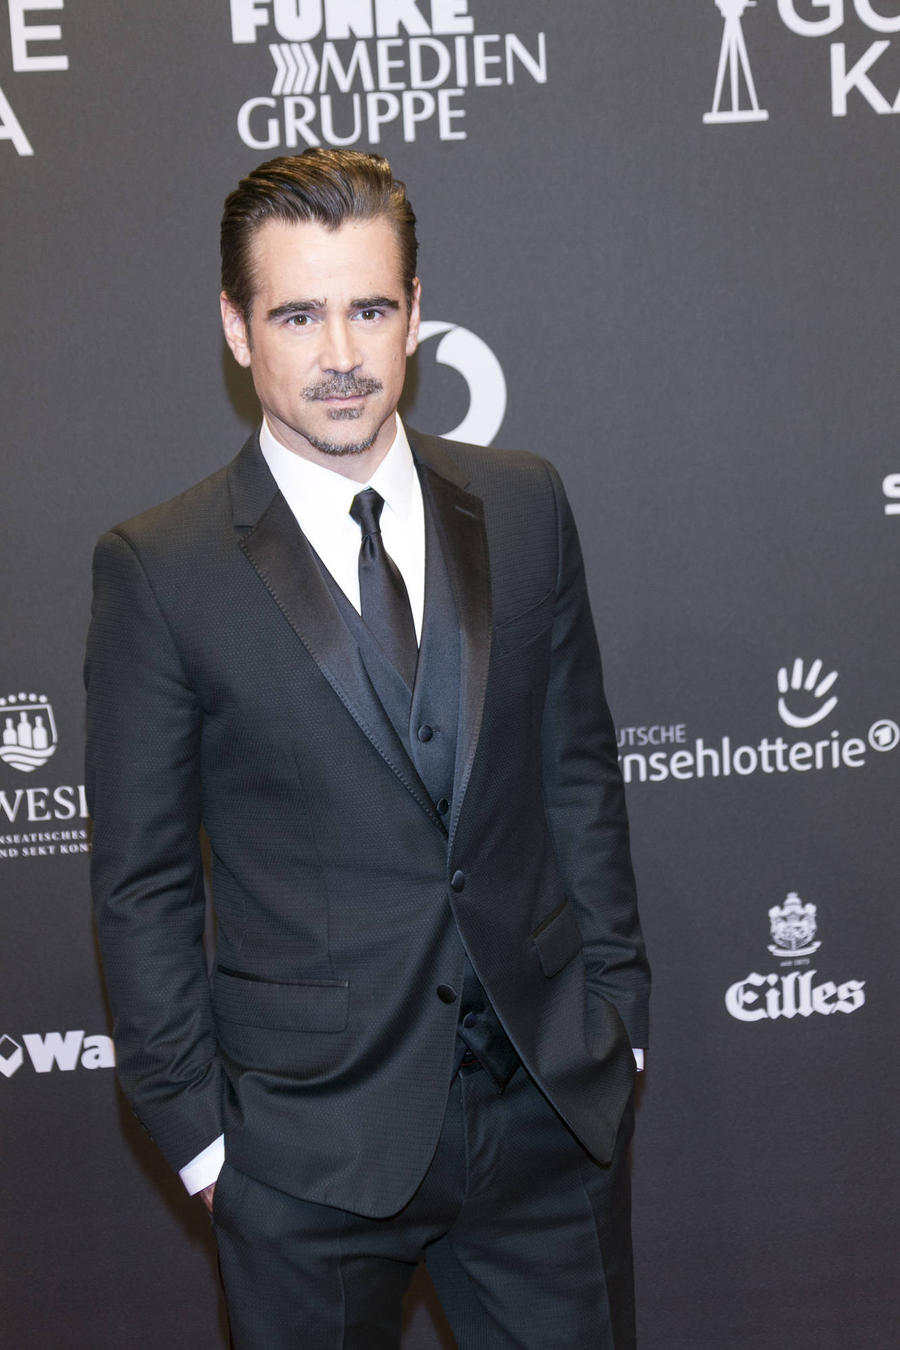 Colin Farrell S Winter S Tale Is An Uplifting Story Of